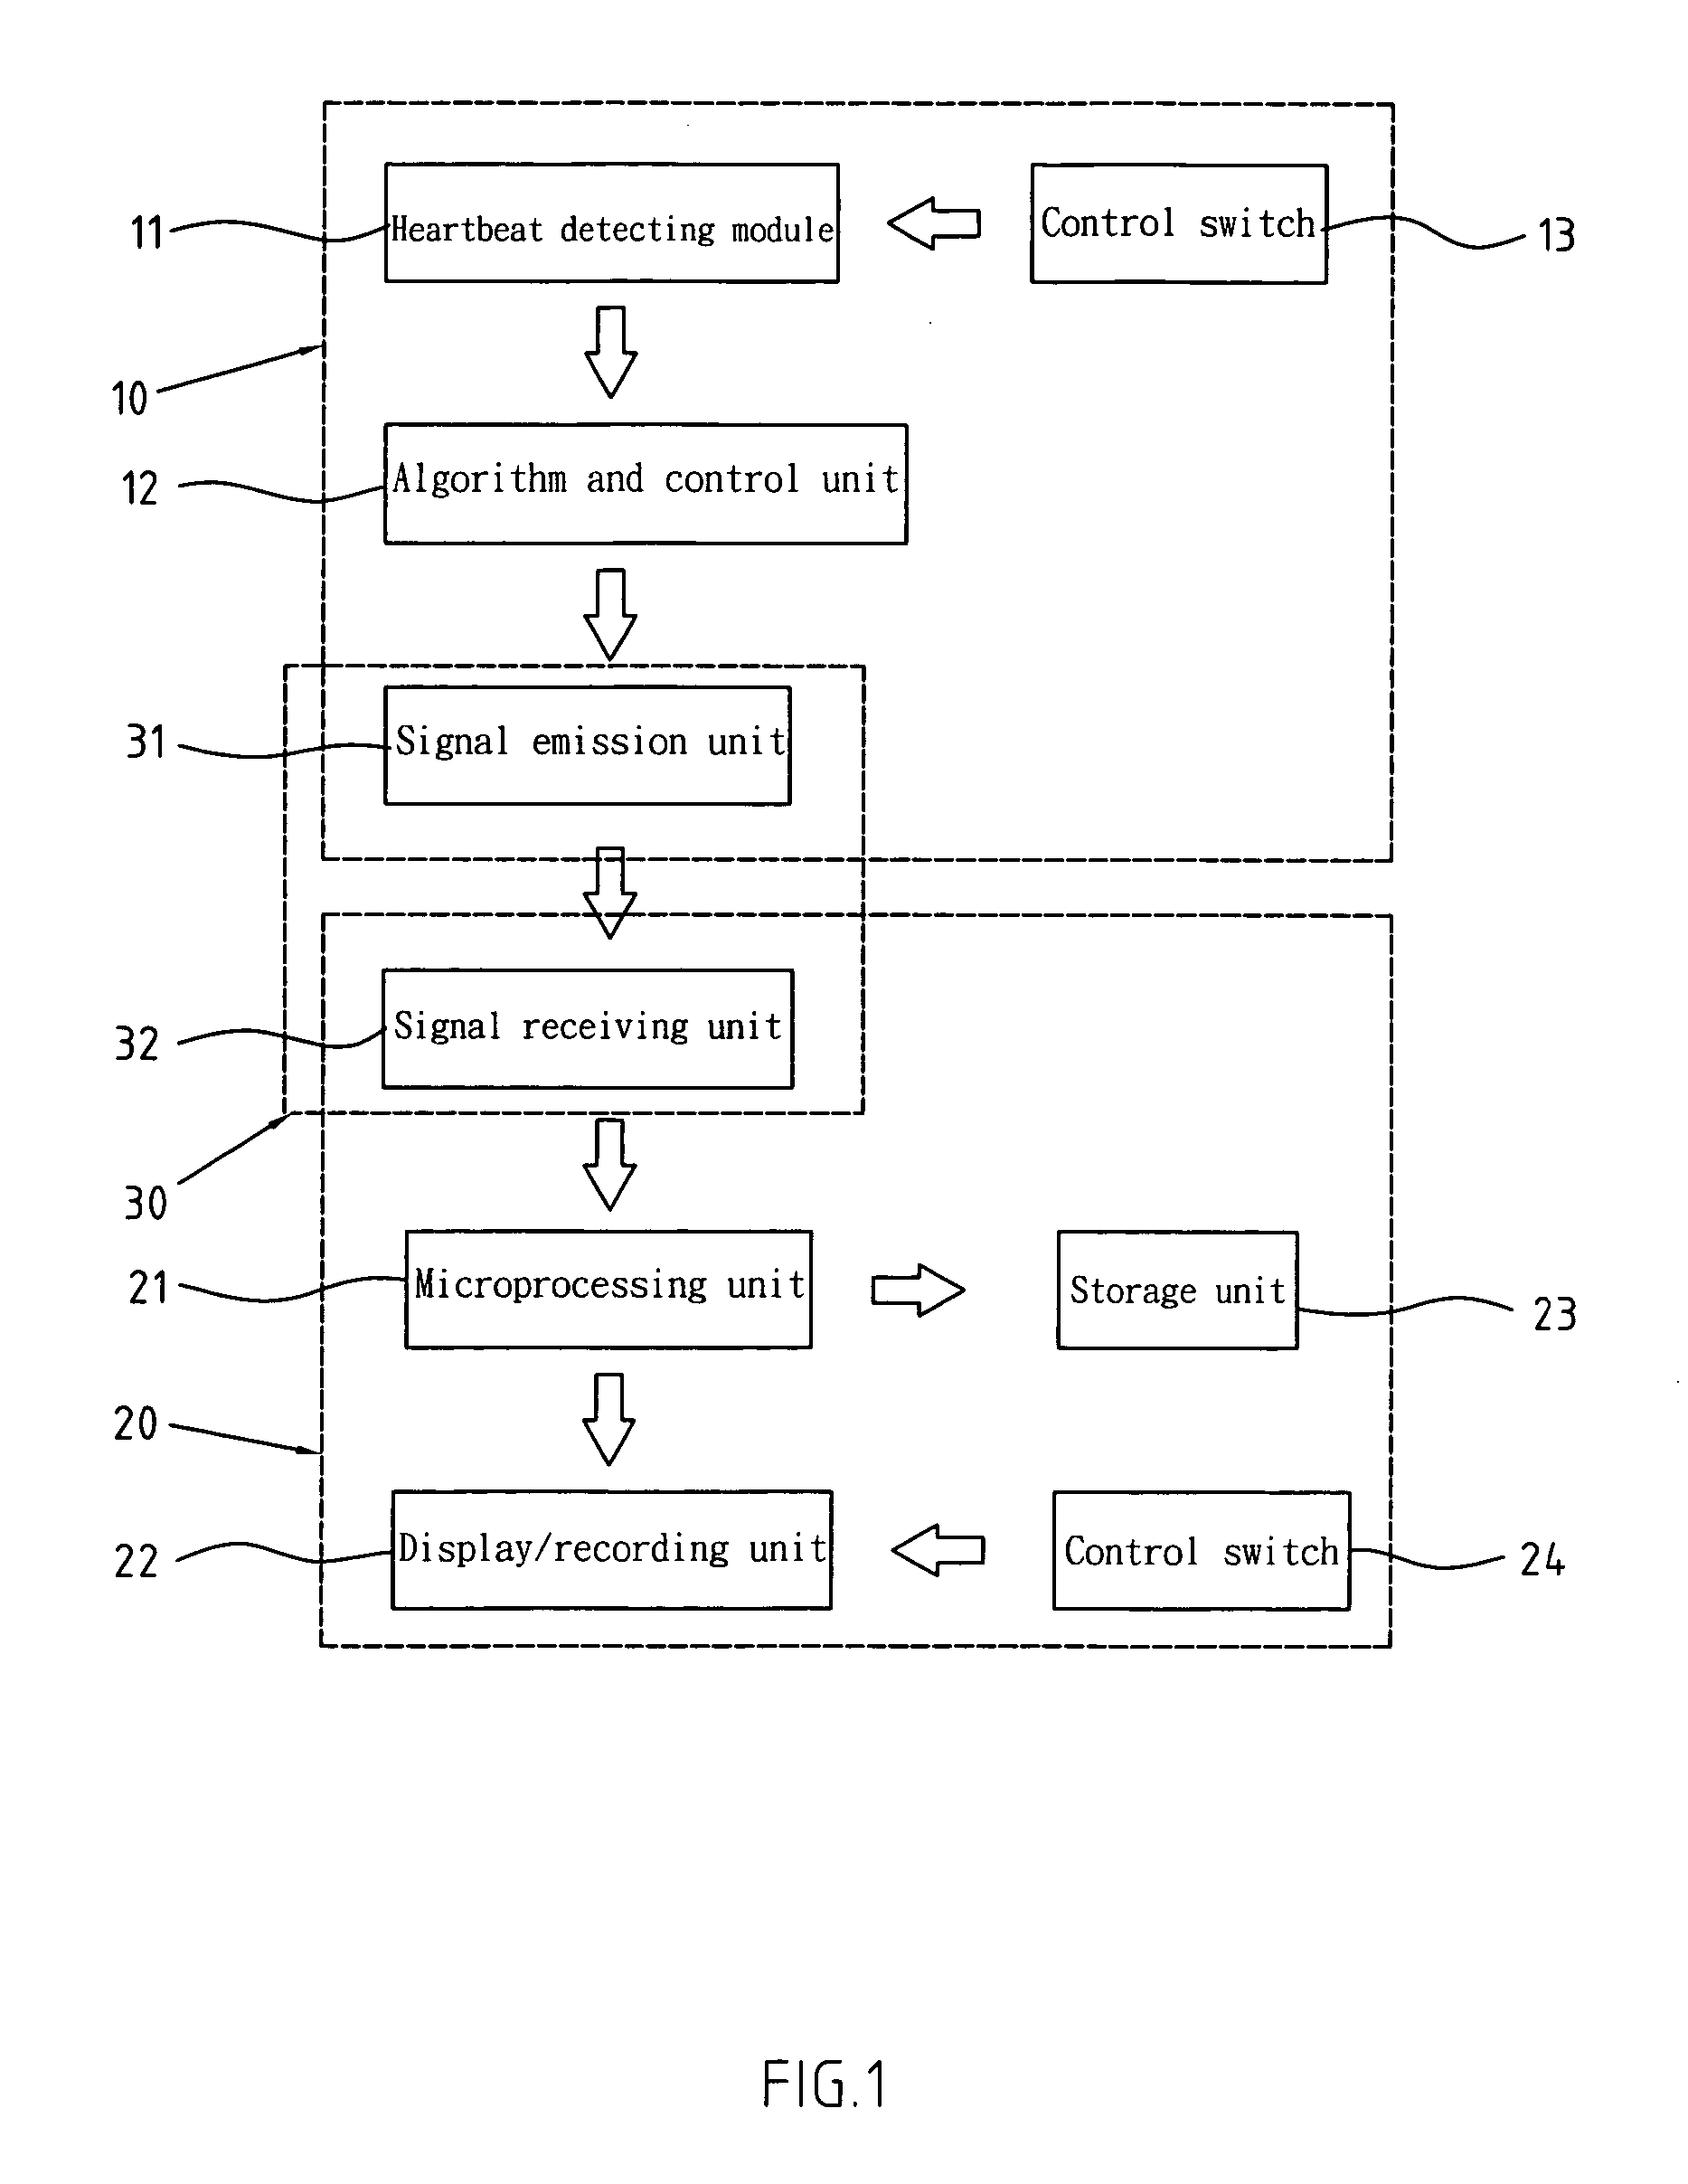 System using a bluetooth headphone for heartbeat monitoring, electronic recording, and displaying data